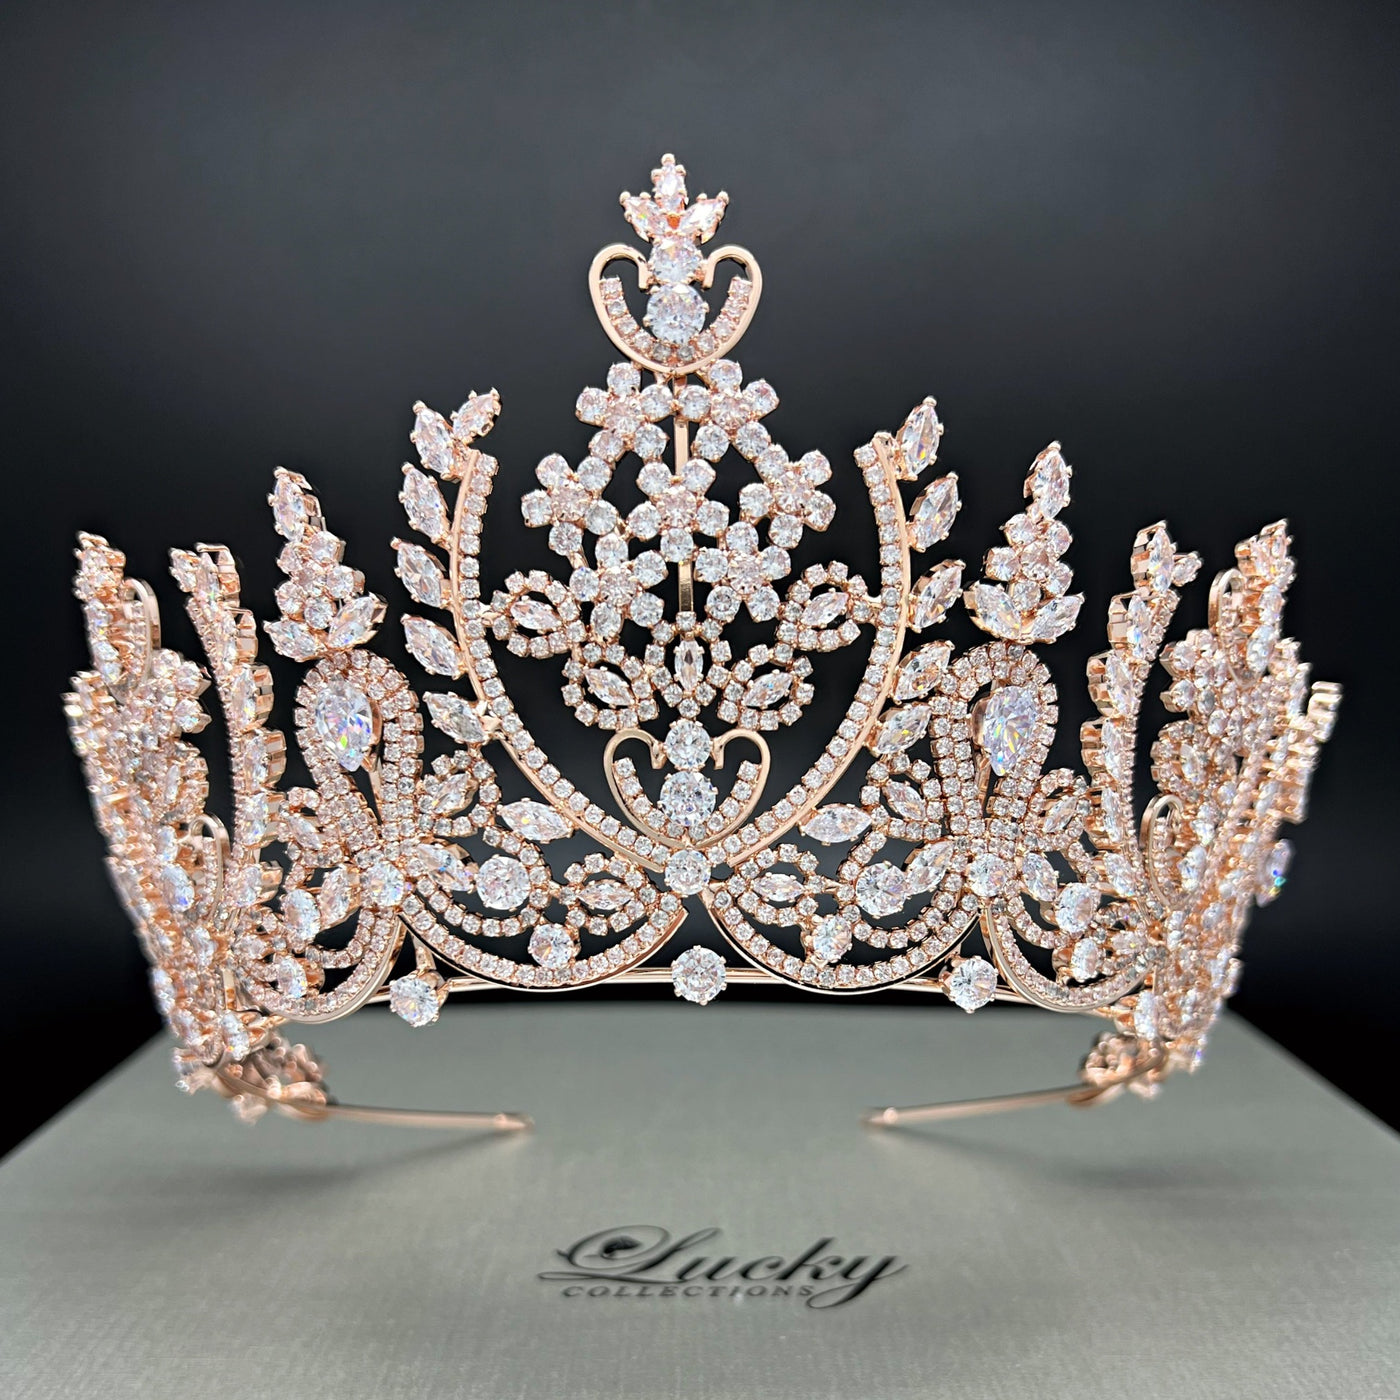 Rosegold Tall Tiara with unique Curves , Lines, Motifs & Style by Headband & Hair Accessories for Brides, Quince, Maid of Honor by Lucky Collections ™